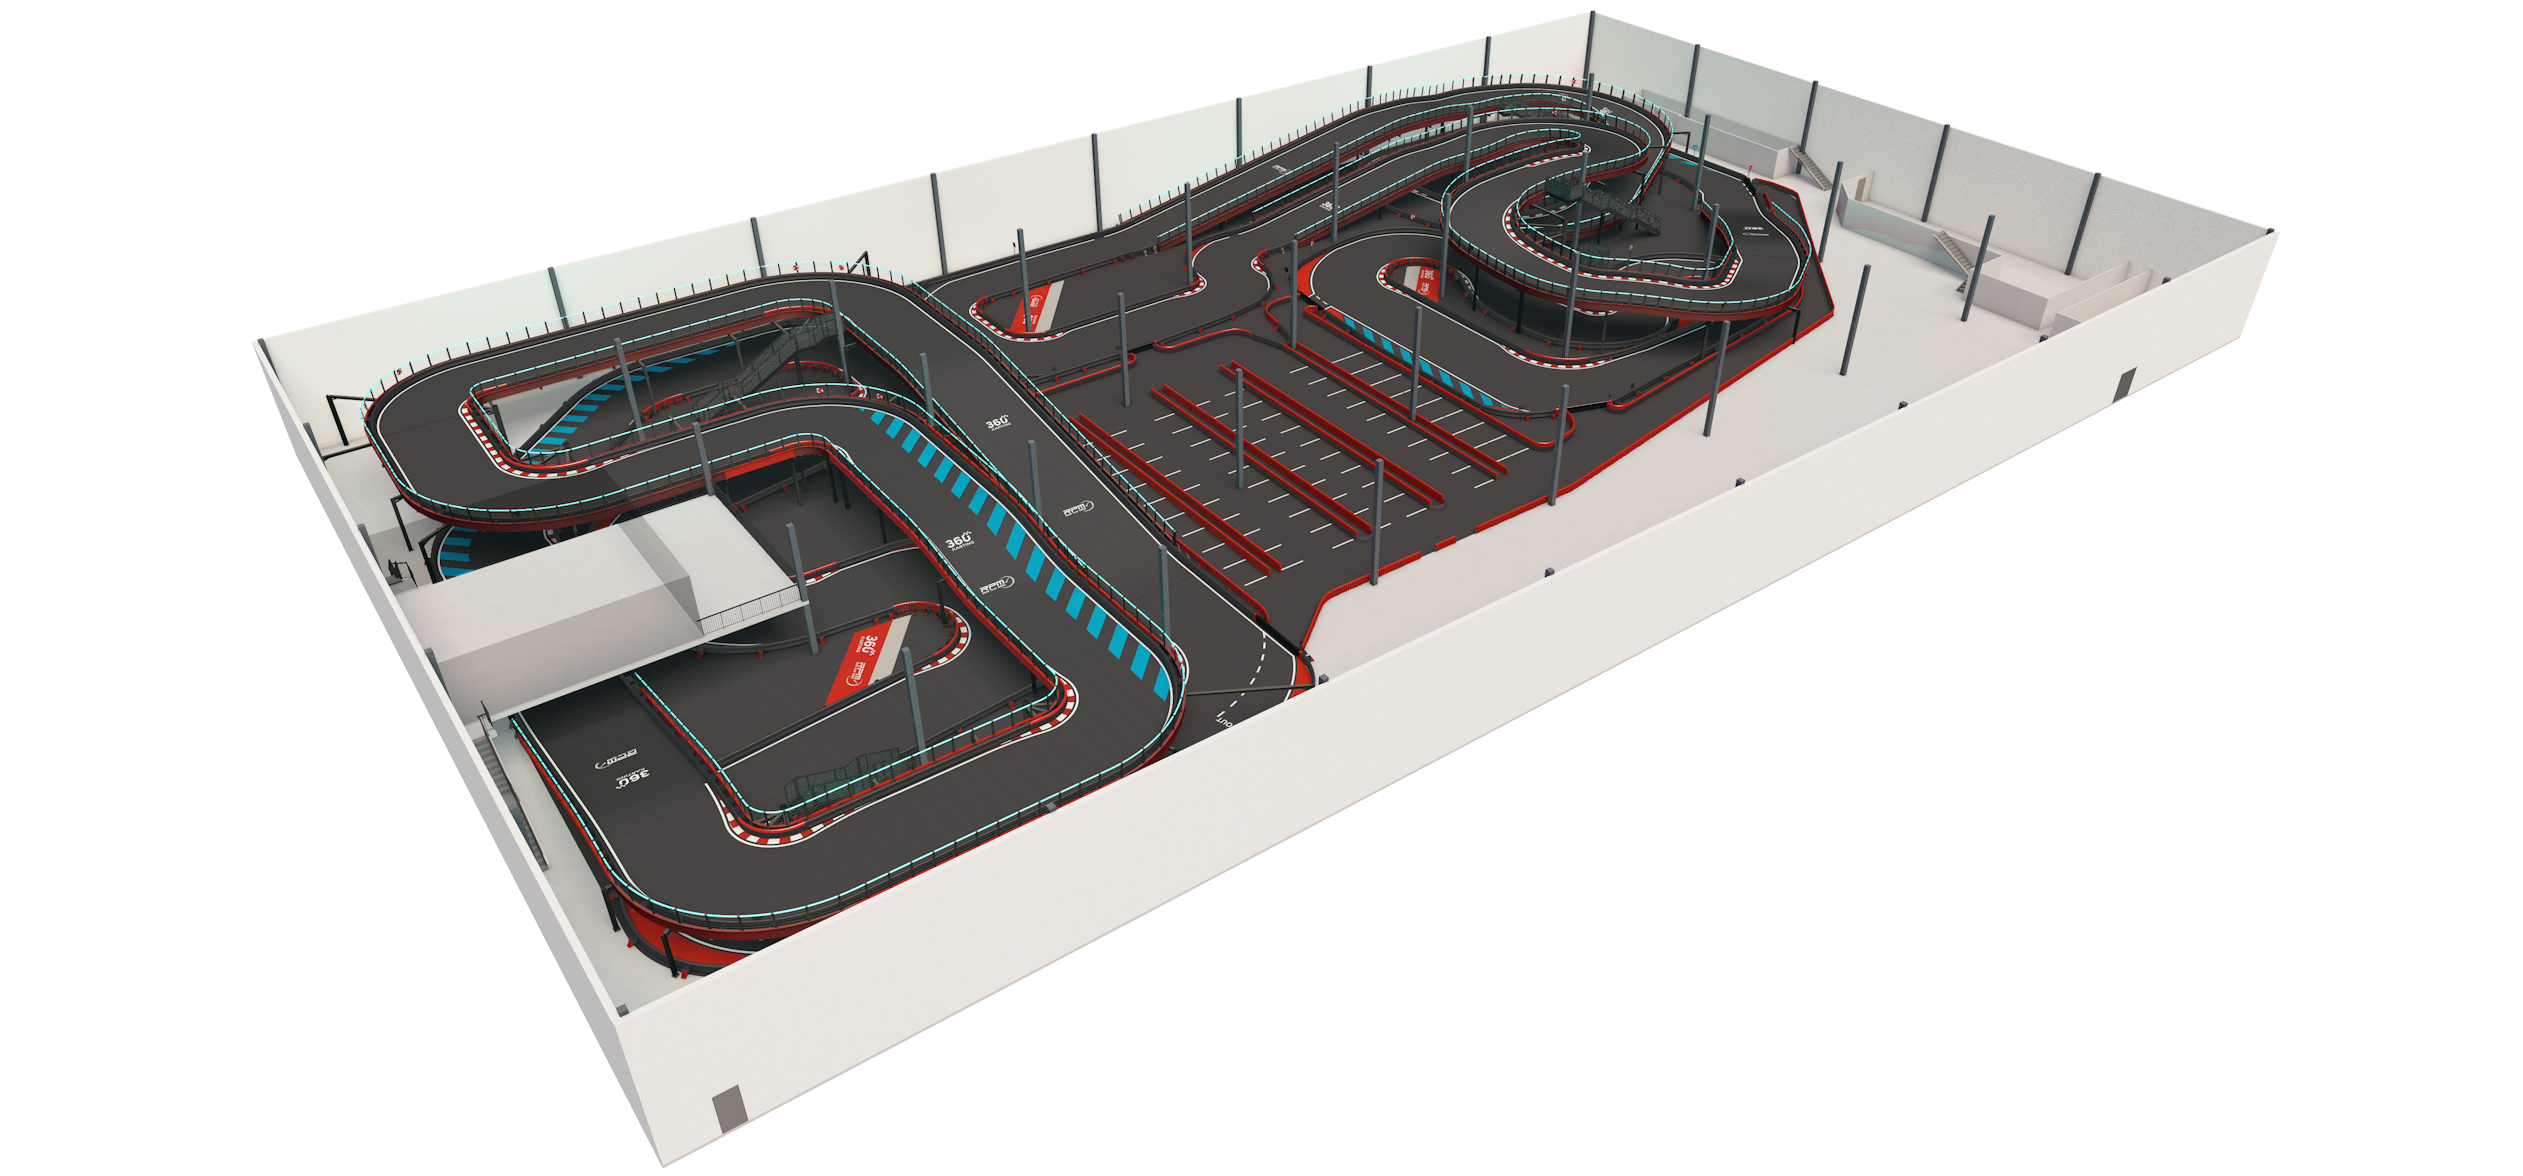 Dresdner Robin’s use of leading technology allowed for the precise placement of the track bolts, which secured the track structure. Rendering courtesy of RPM Raceway.